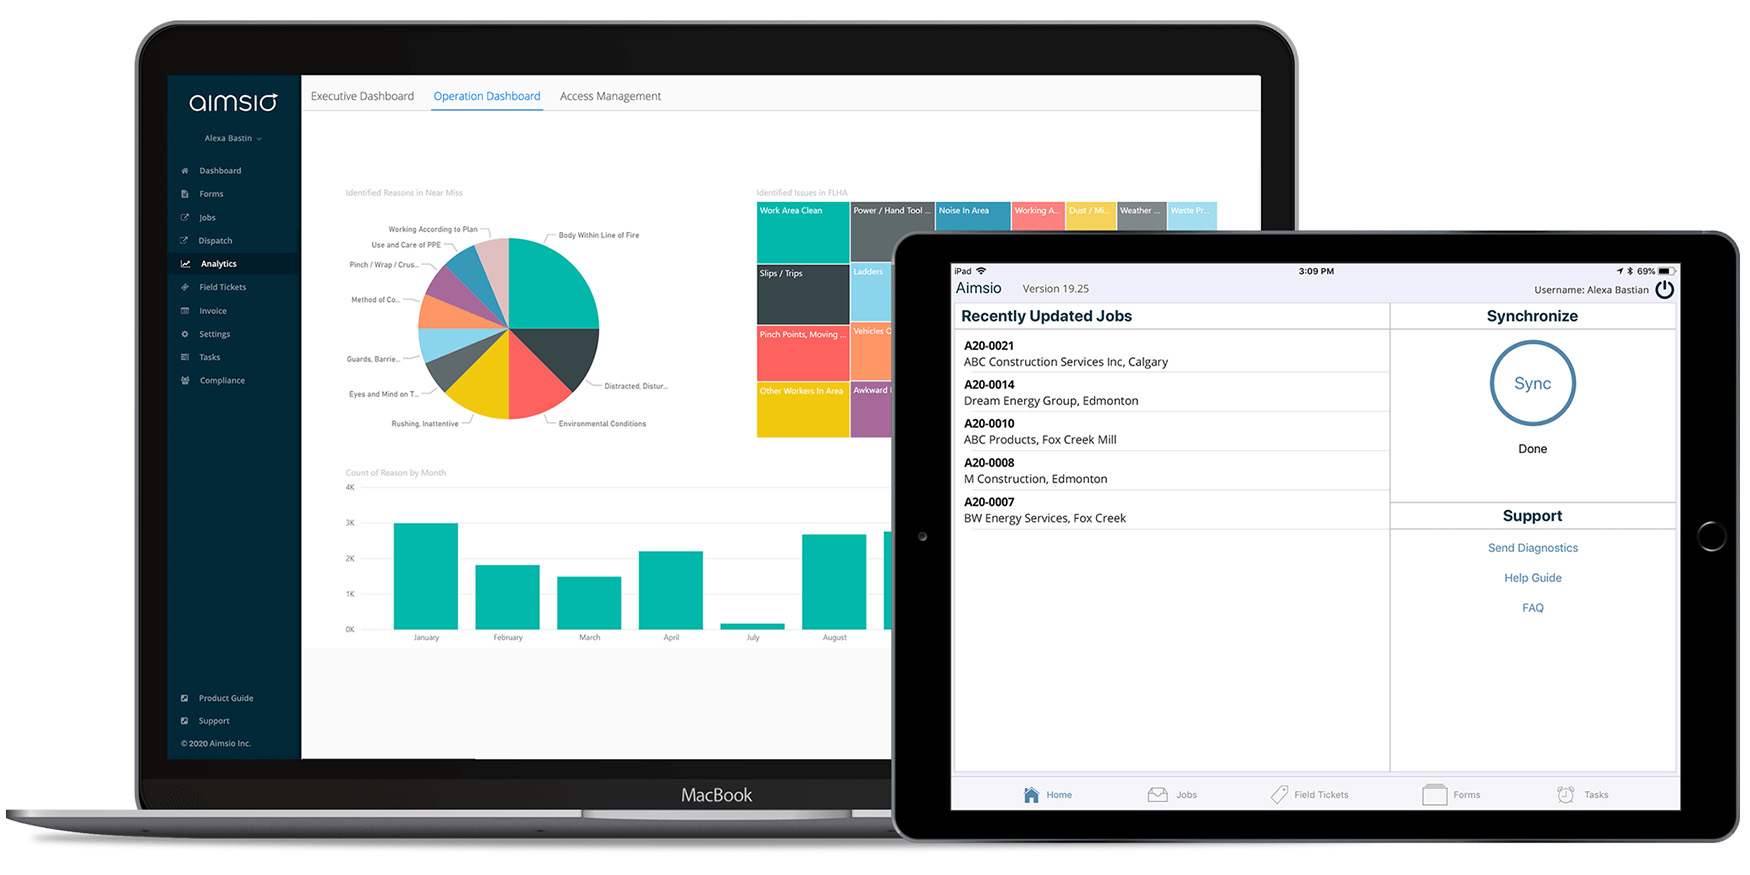 Streamline Your Business Processes with One Powerful Platform